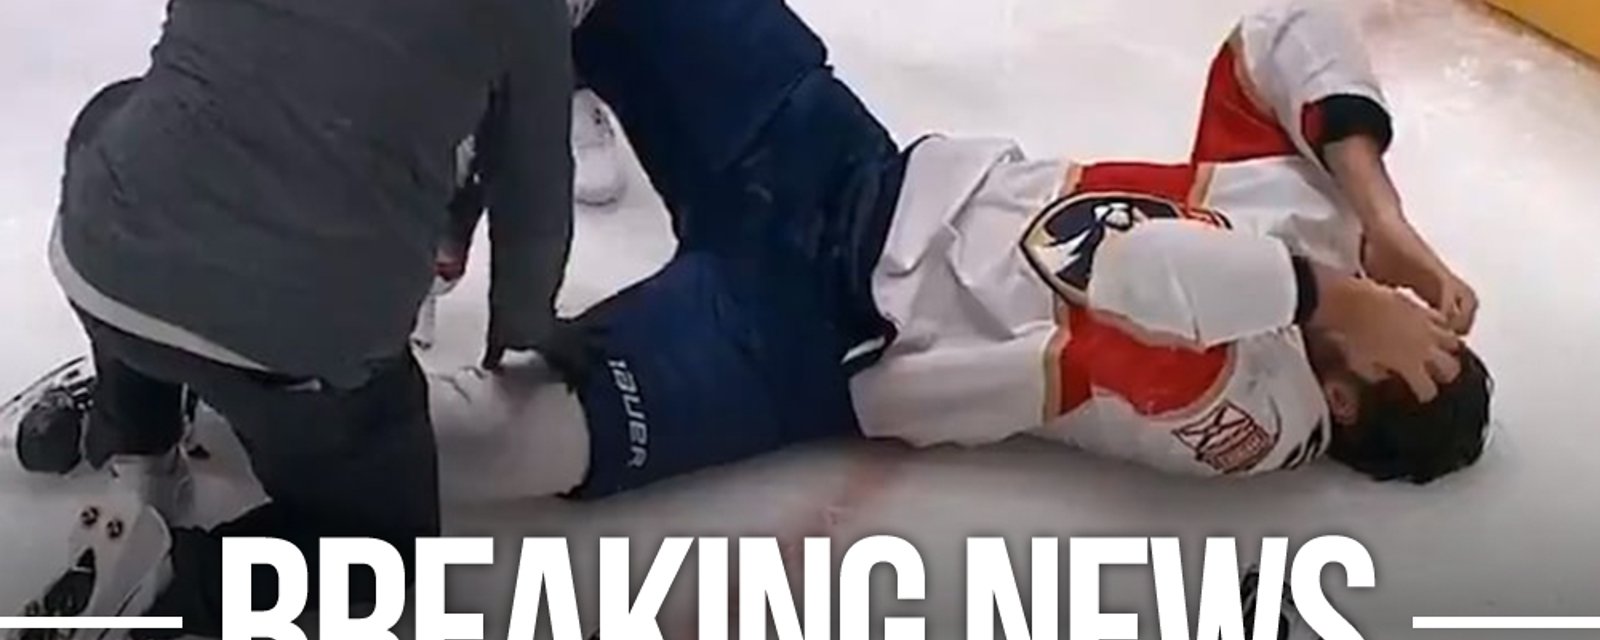 It's official, Ekblad is out for the season